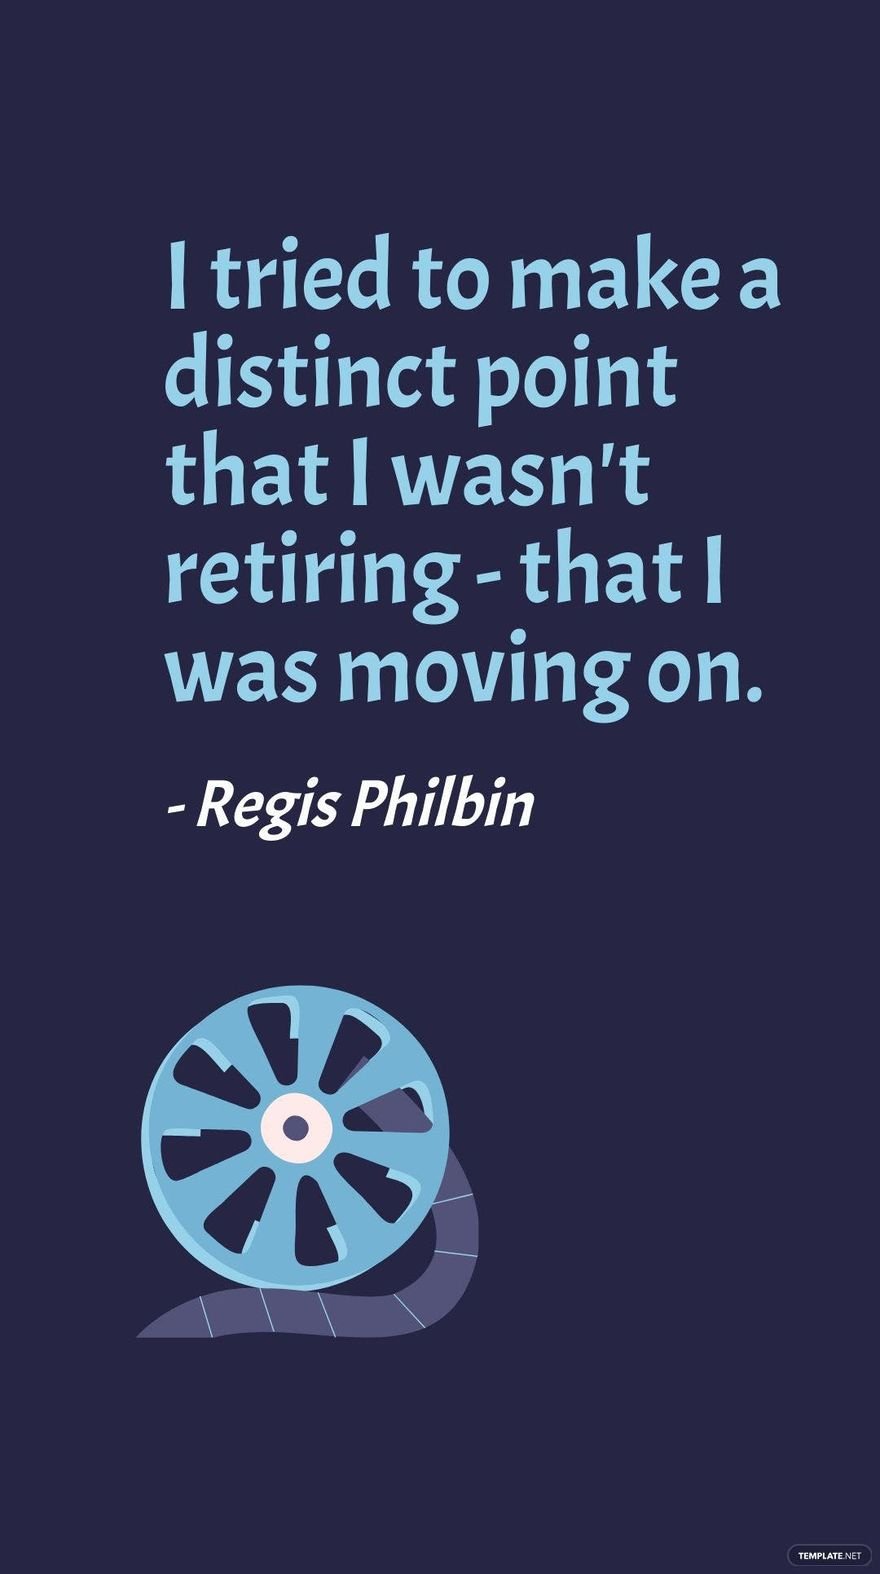 Free Regis Philbin - I tried to make a distinct point that I wasn't retiring - that I was moving on. in JPG